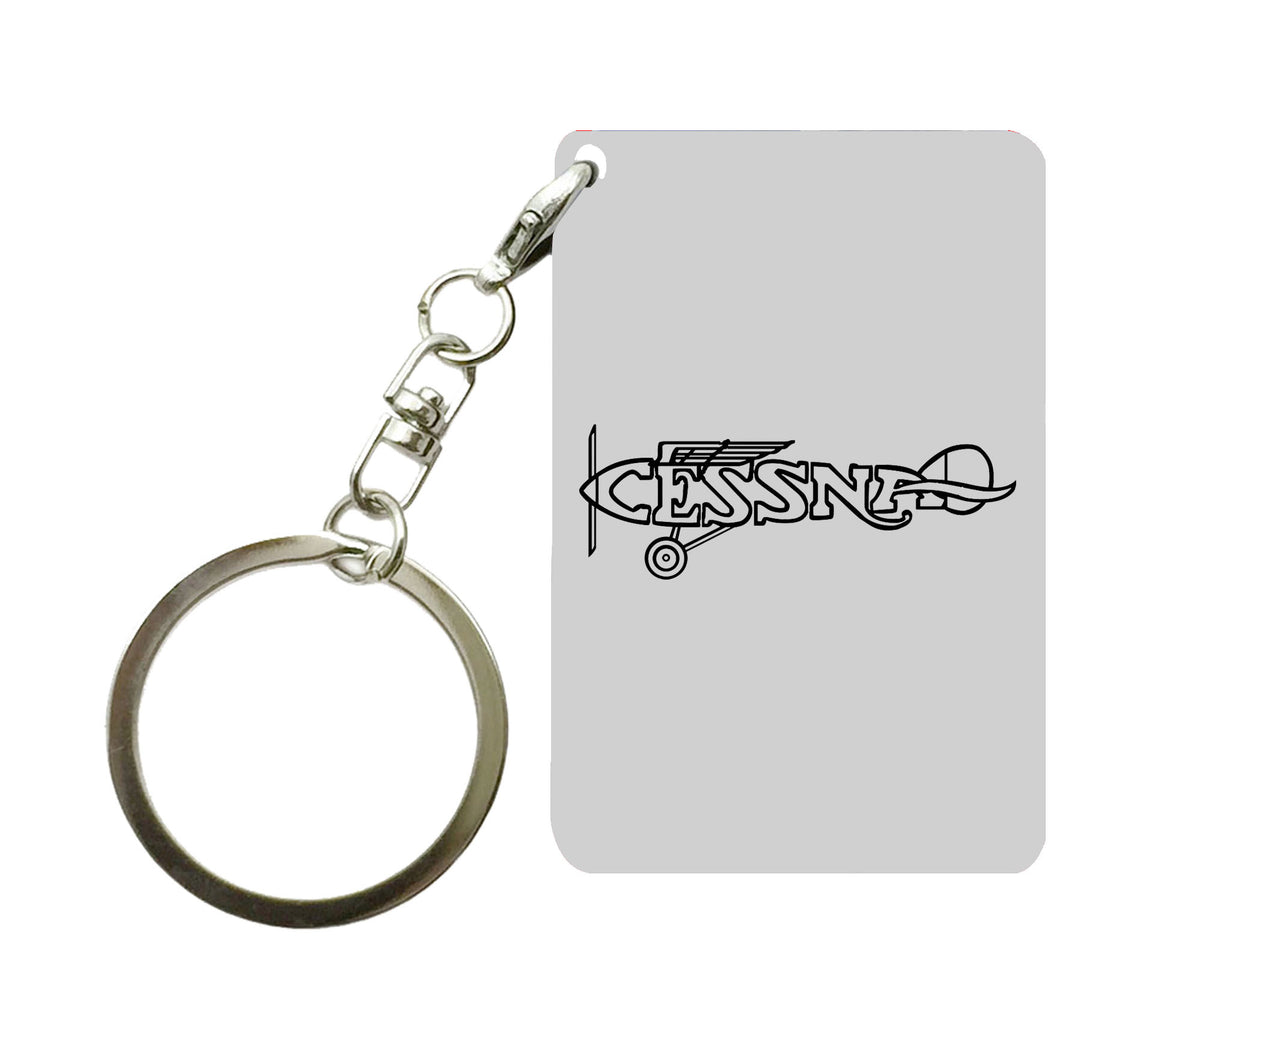 Special Cessna Text Designed Key Chains